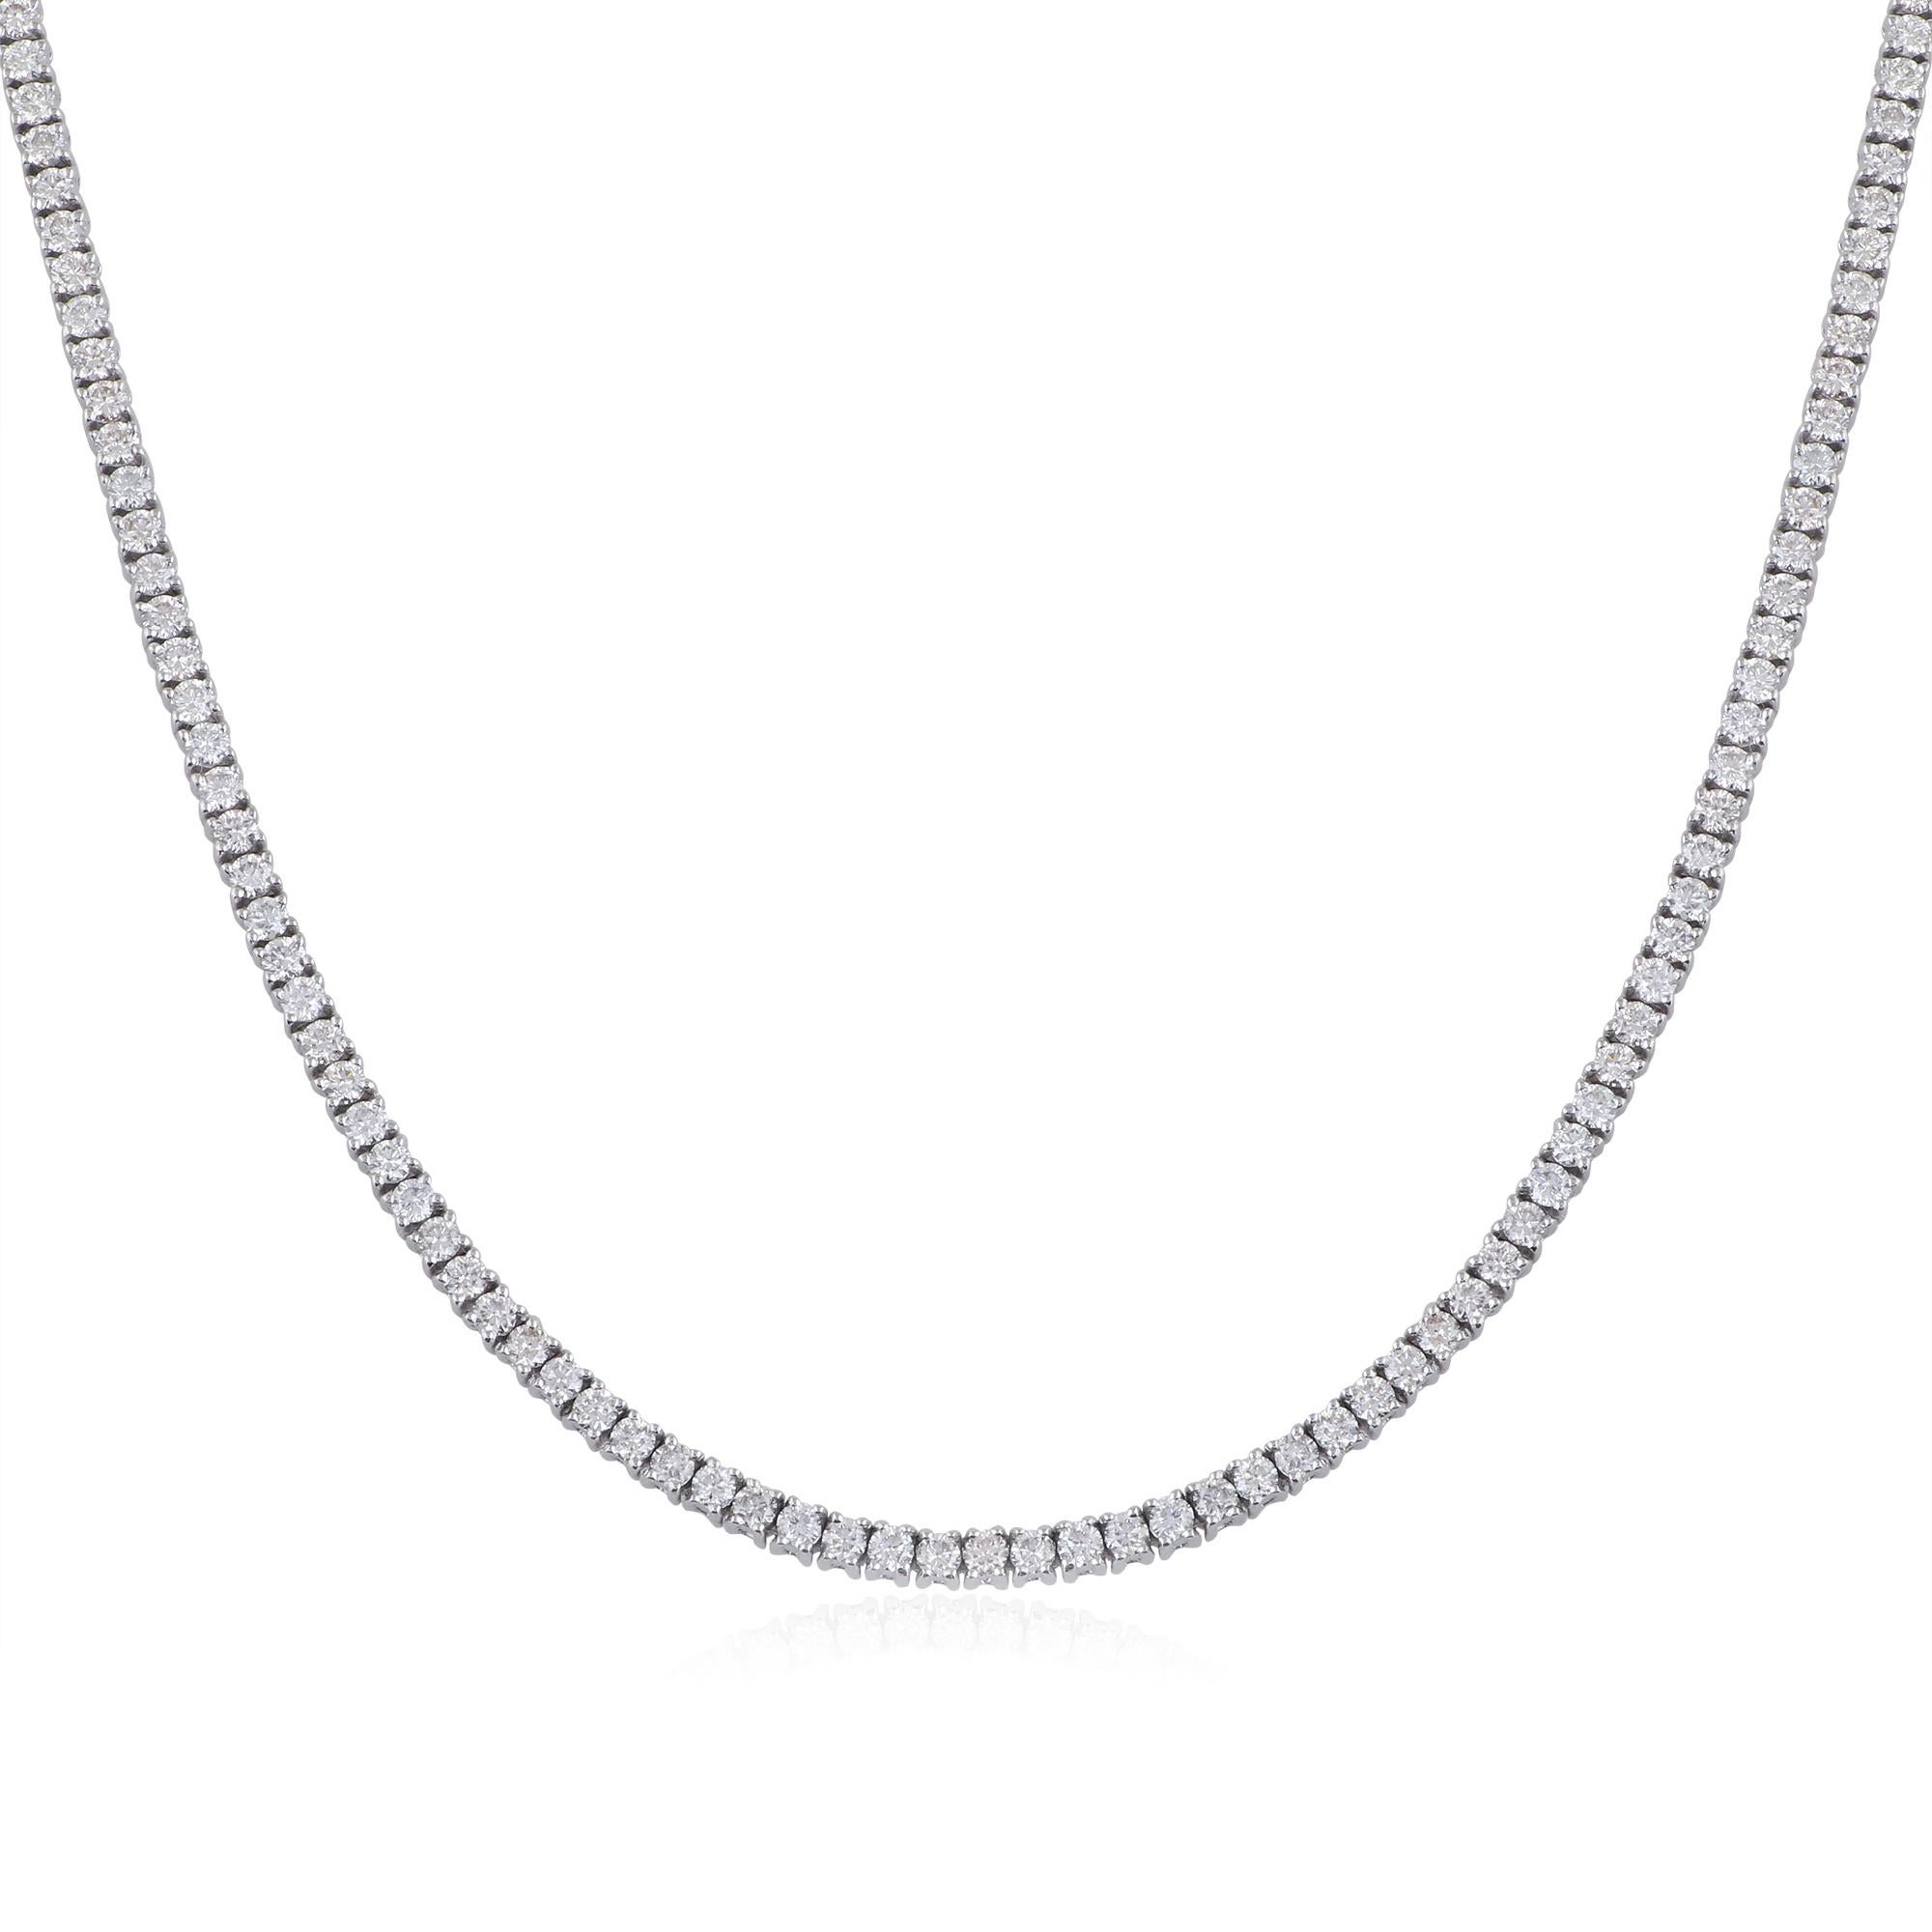 Item Code :- SECH-7496
Gross Wt. :- 14.62 gm
18k White Gold Wt. :- 13.30 gm
Natural Diamond Wt. :- 6.60 Ct. ( AVERAGE DIAMOND CLARITY SI1-SI2 & COLOR H-I )
Necklace Size :- 16 Inches Long

✦ Sizing
.....................
We can adjust most items to